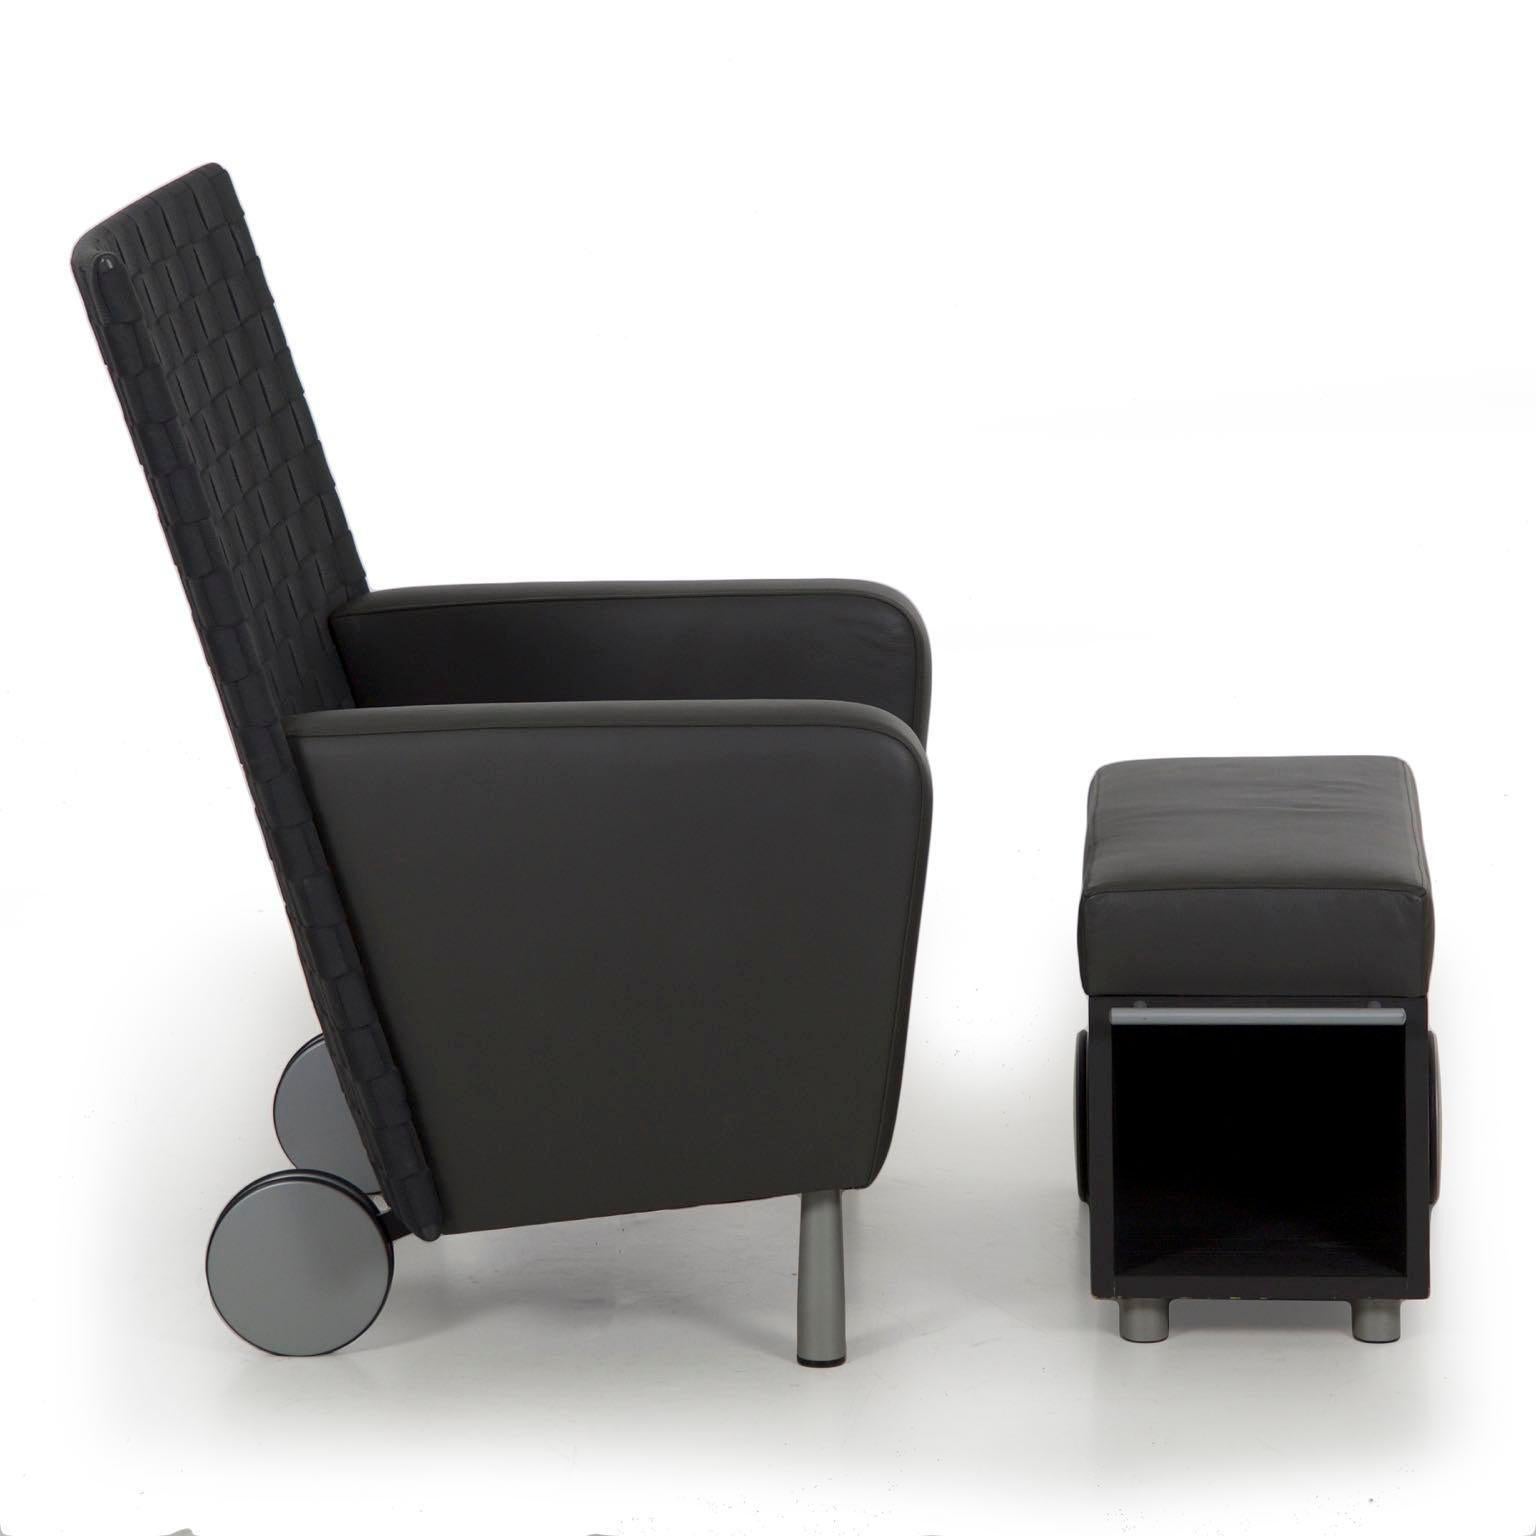 Modern gray leather and woven-back lounge chair with ottoman
Over wheeled back legs, circa 21st century, unmarked 

An interesting and high quality modern lounge chair with matching ottoman, this matched set is a vivid strike point that is robust